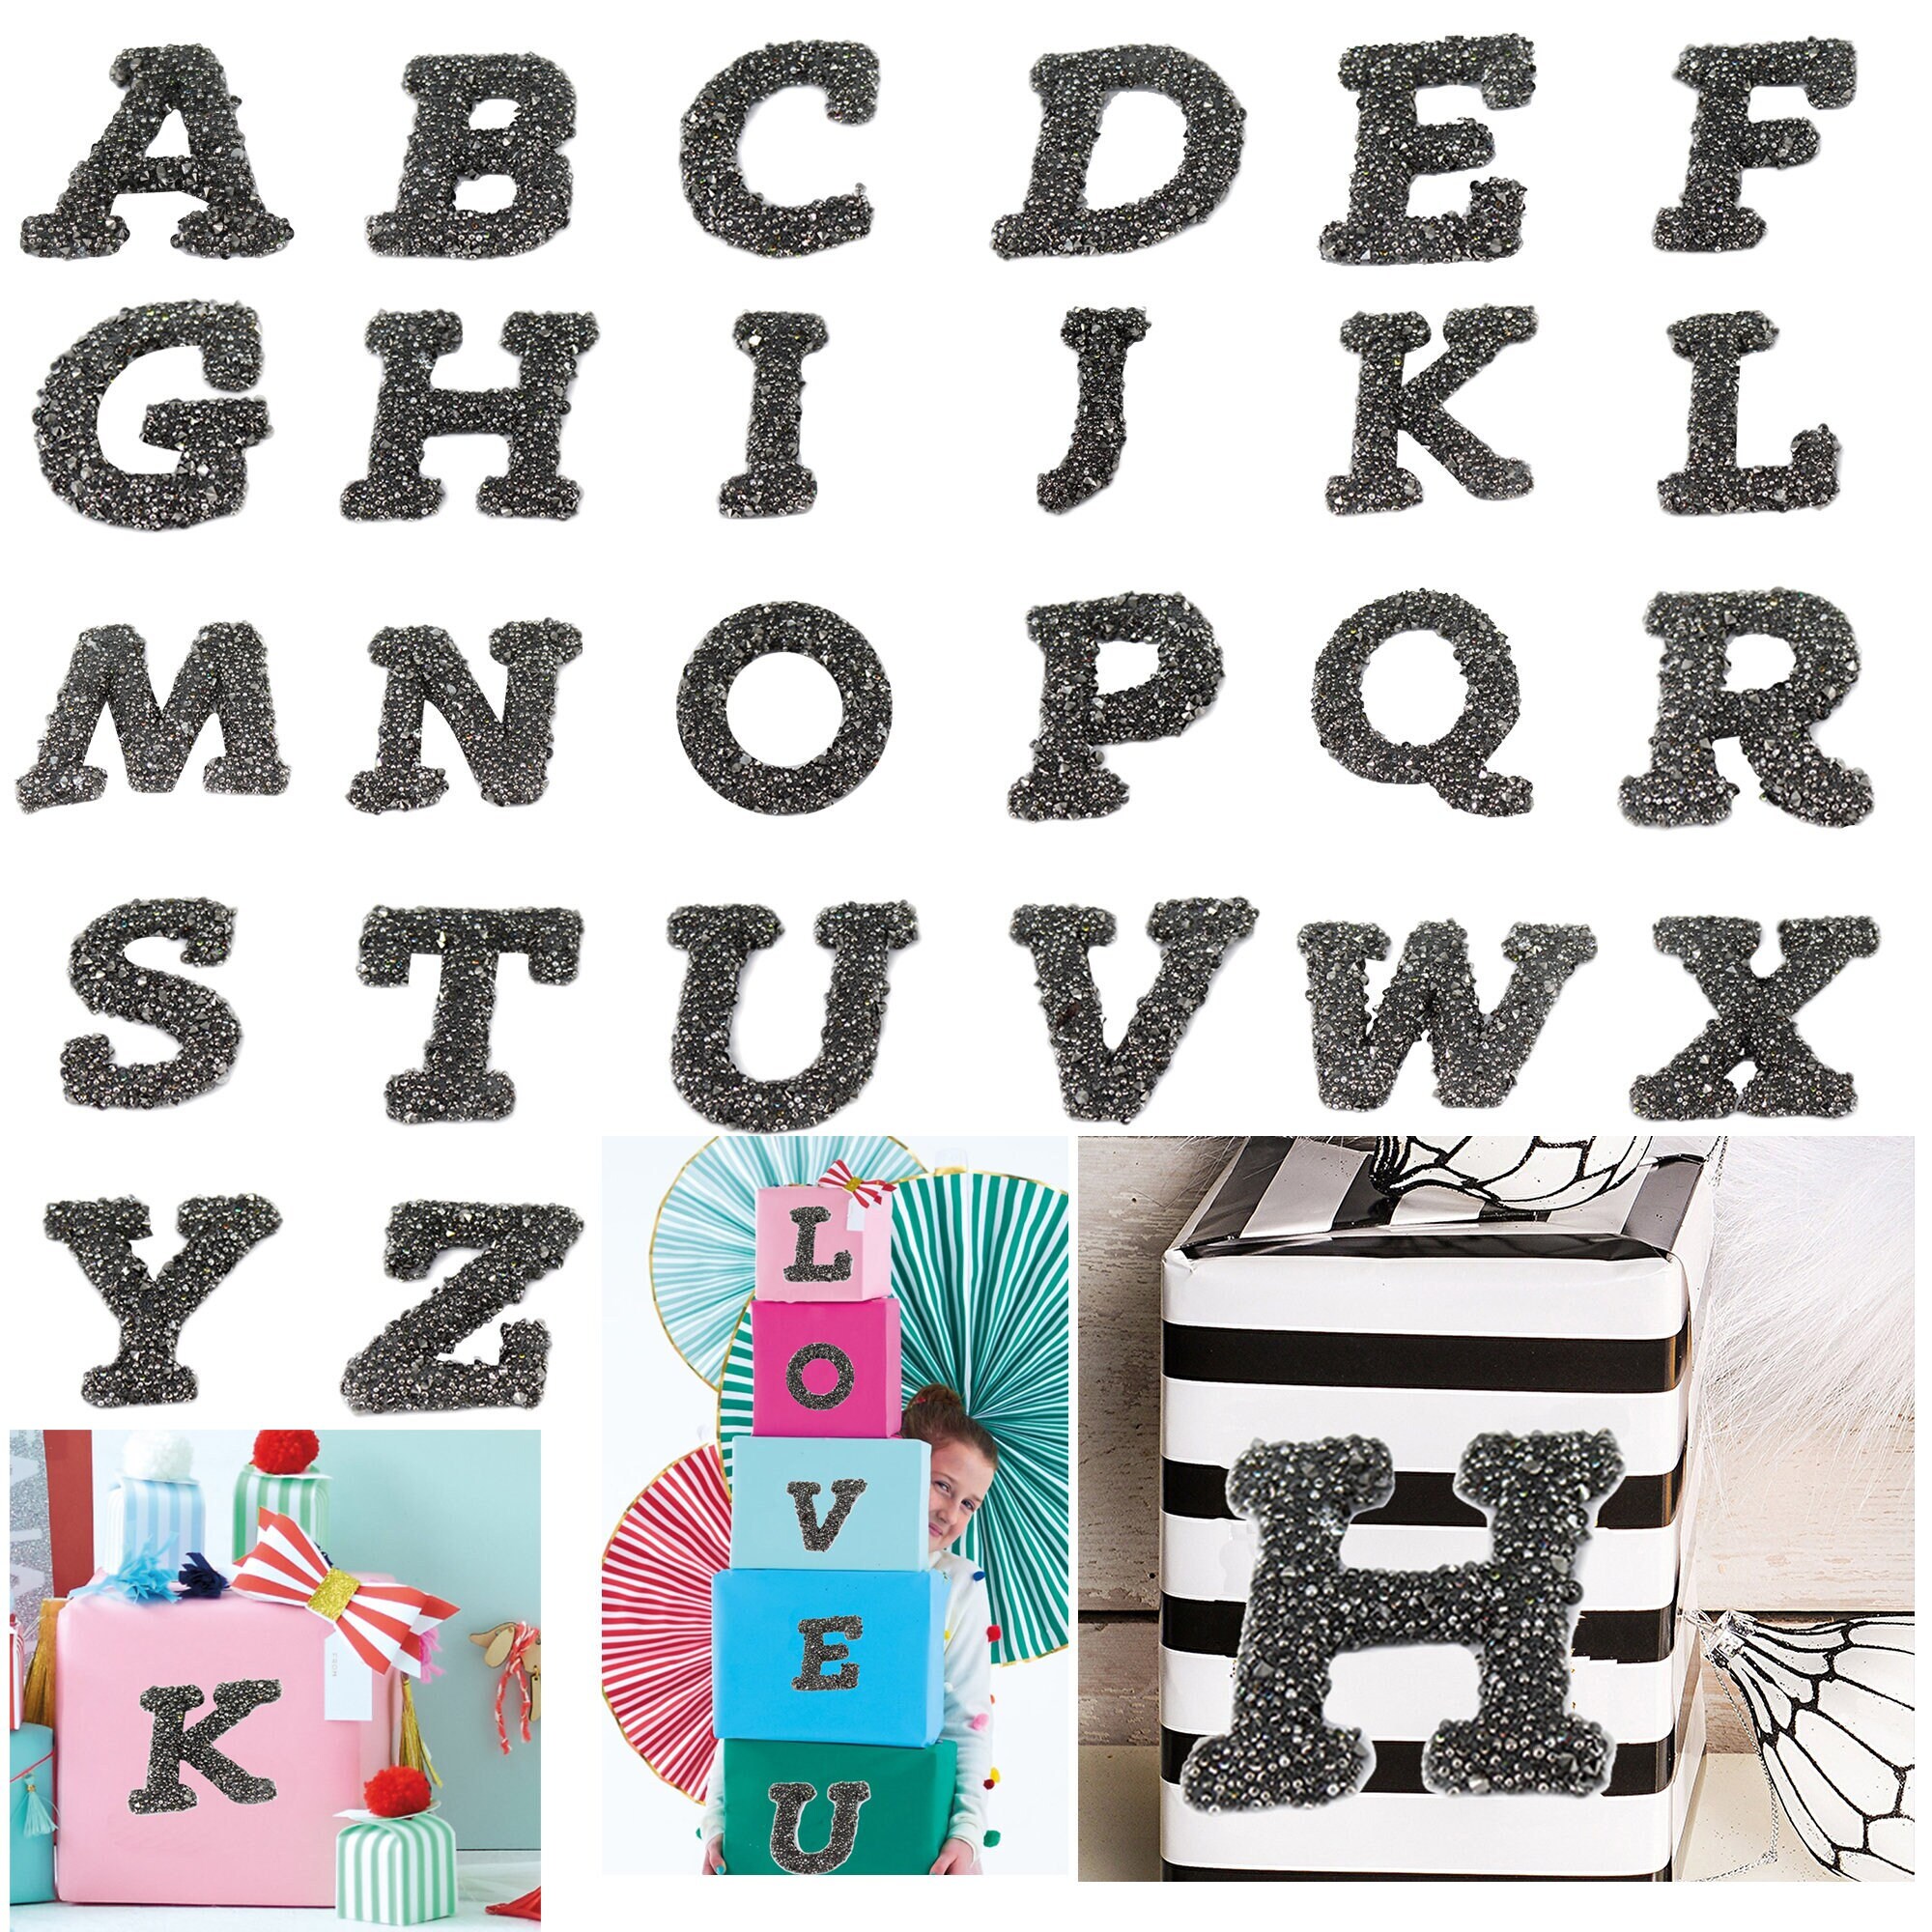 Sticker Foam Letters 2 Inches, Self-adhesive Fun Foam Die Cut Alphabet  Letters for Kids, Crafting & School Projects 